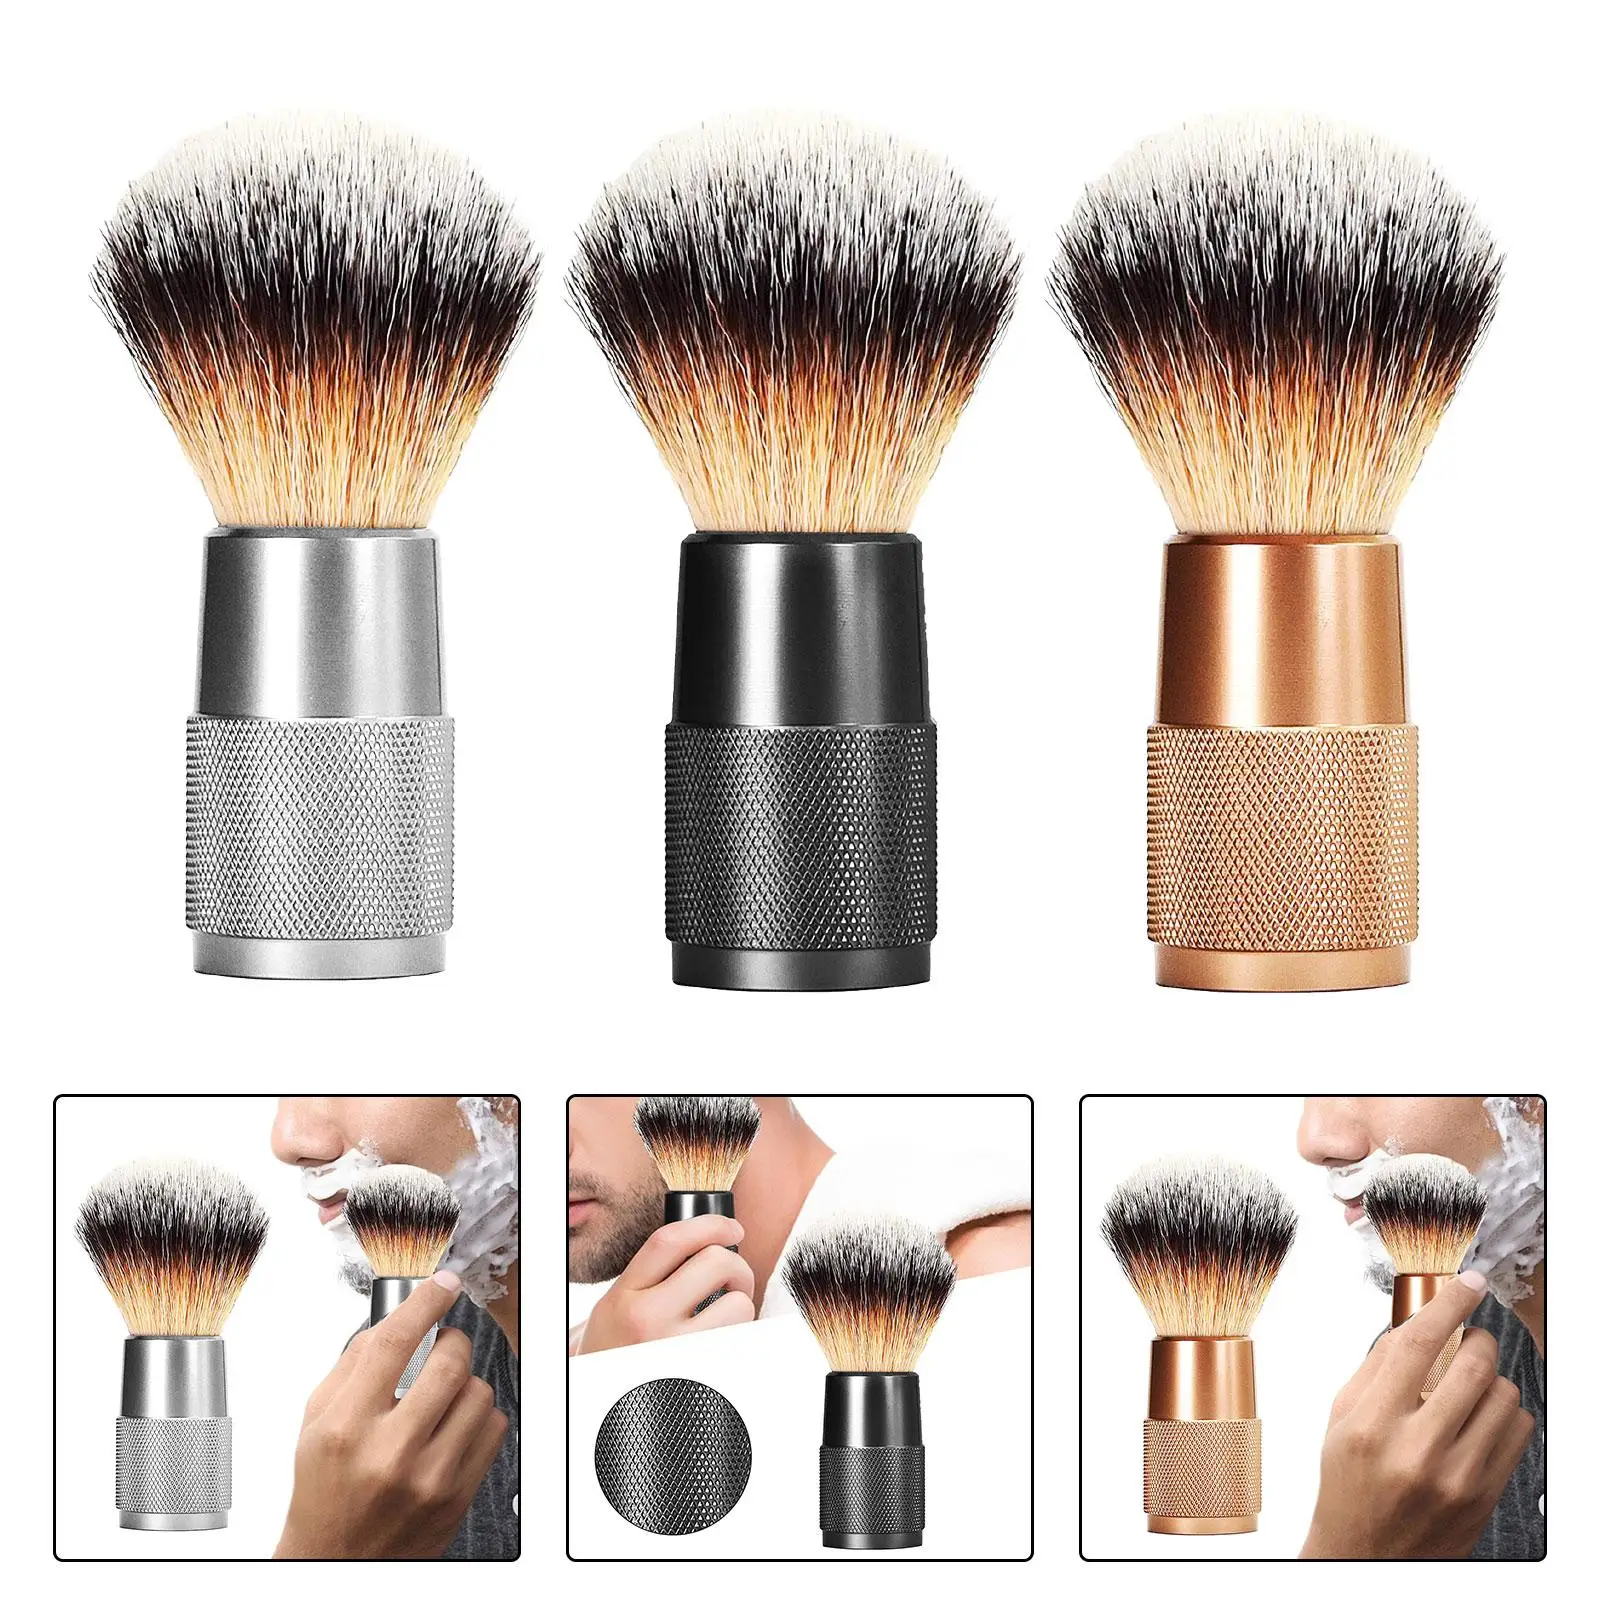 Men Shave Brush Portable Father Day Gifts Shaving Accessory Professional Durable Facial Beard Cleaning Nylon Synthetic Bristles